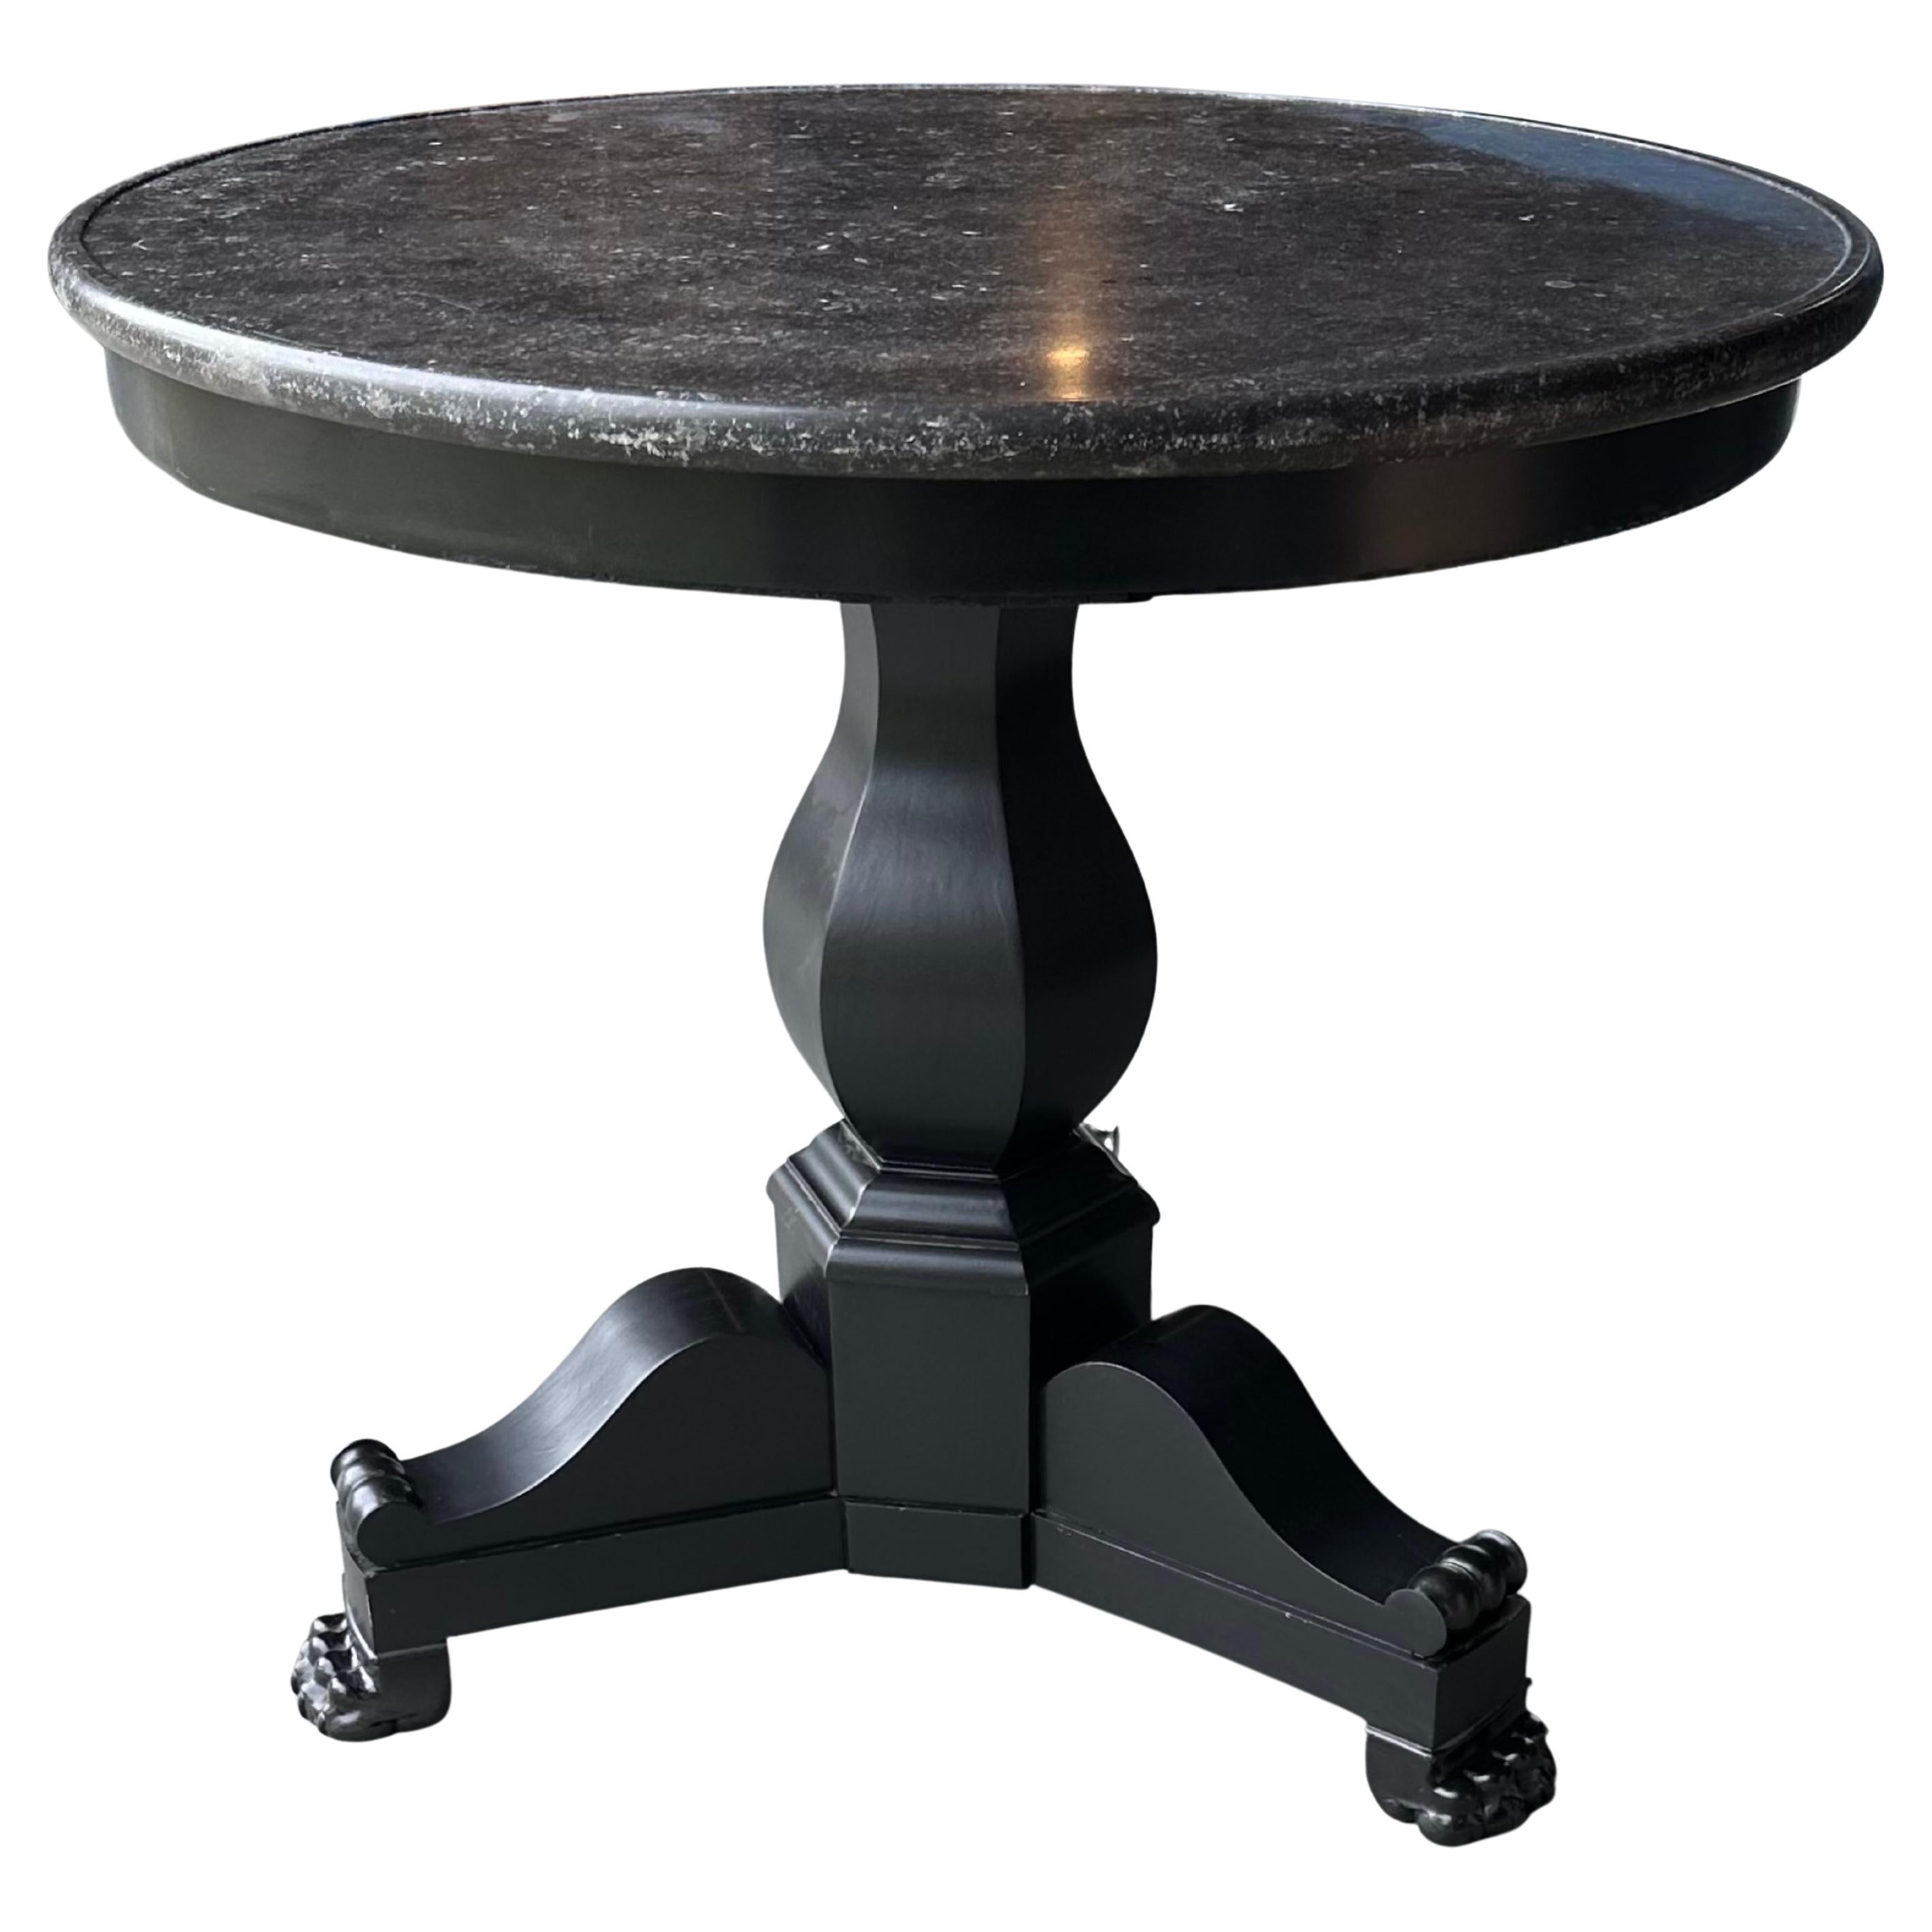 19th Century French Empire Style Gueridon with Black Marble Top